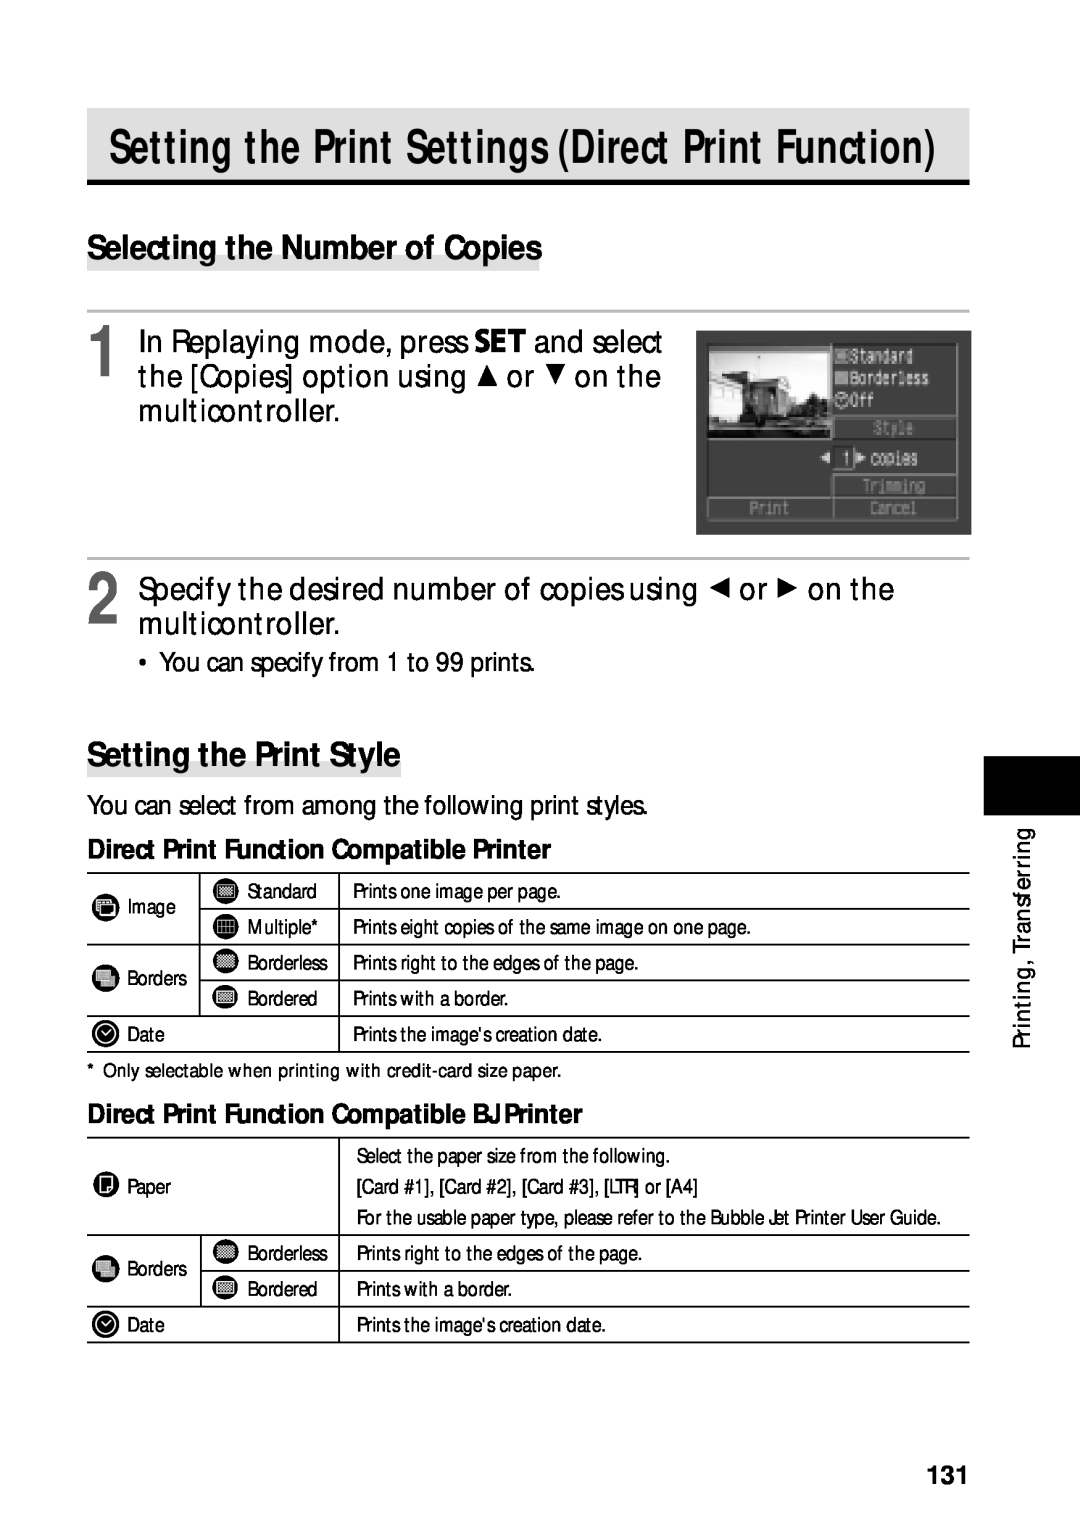 Canon PowerShot S45 manual Setting the Print Settings Direct Print Function, Selecting the Number of Copies 